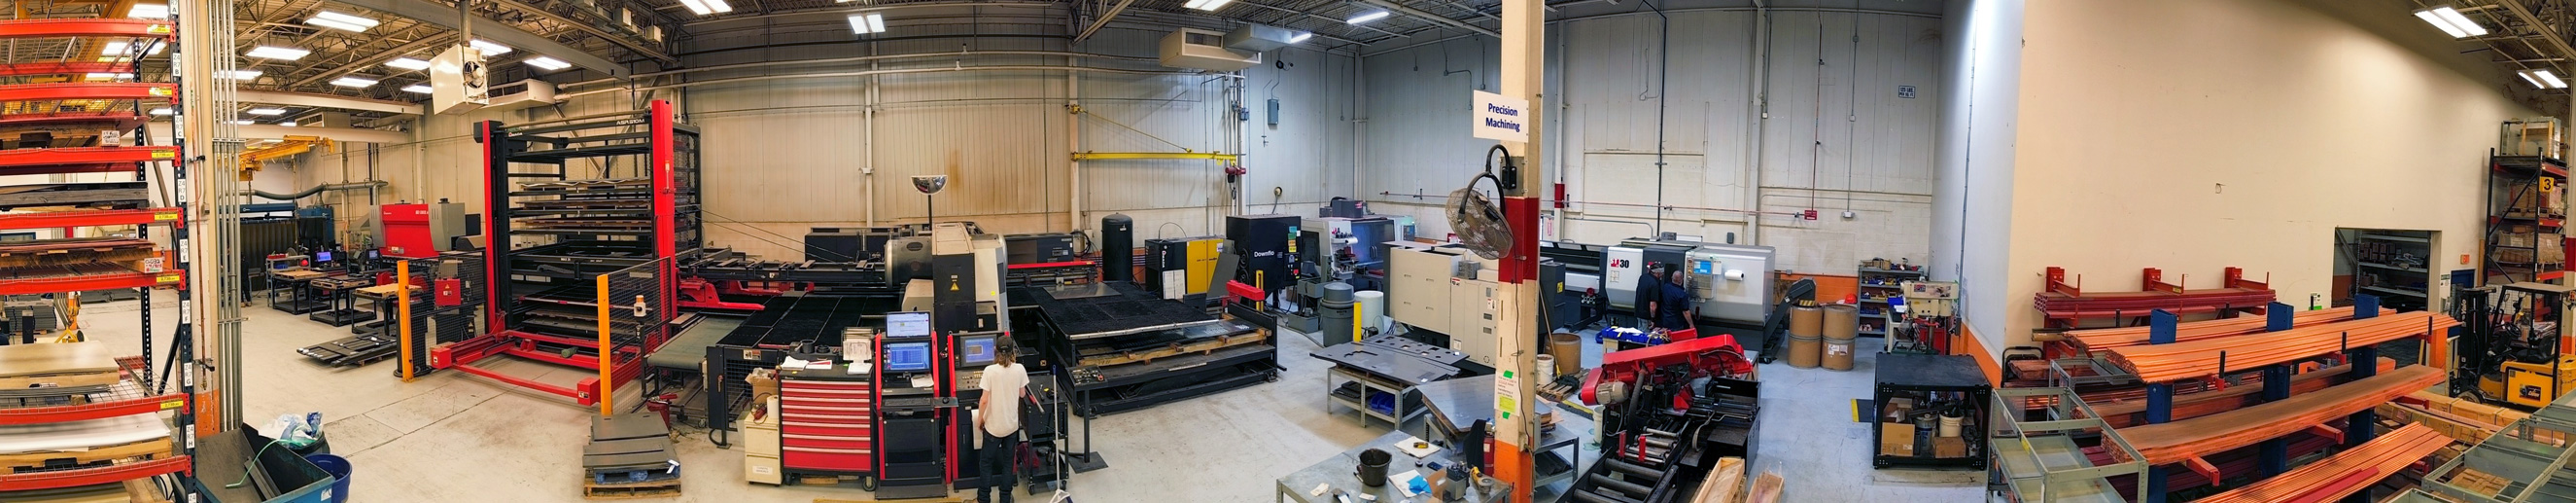 The precision machining section at LayerZero.